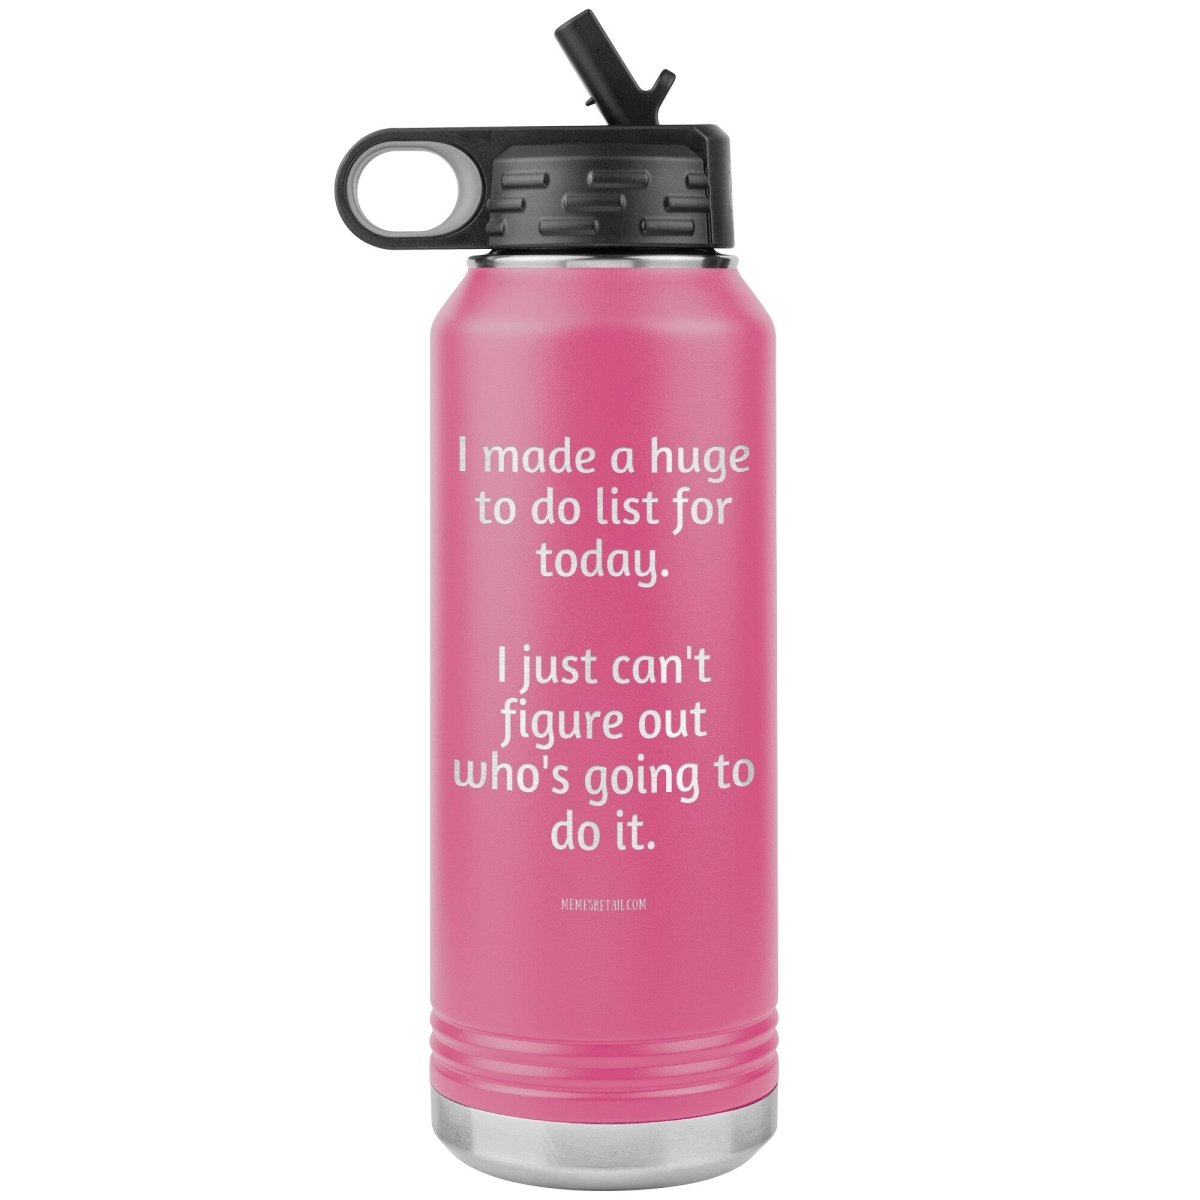 I made a huge to do list for today. I just can't figure out who's going to do it. 32 oz Water Tumbler, Pink - MemesRetail.com